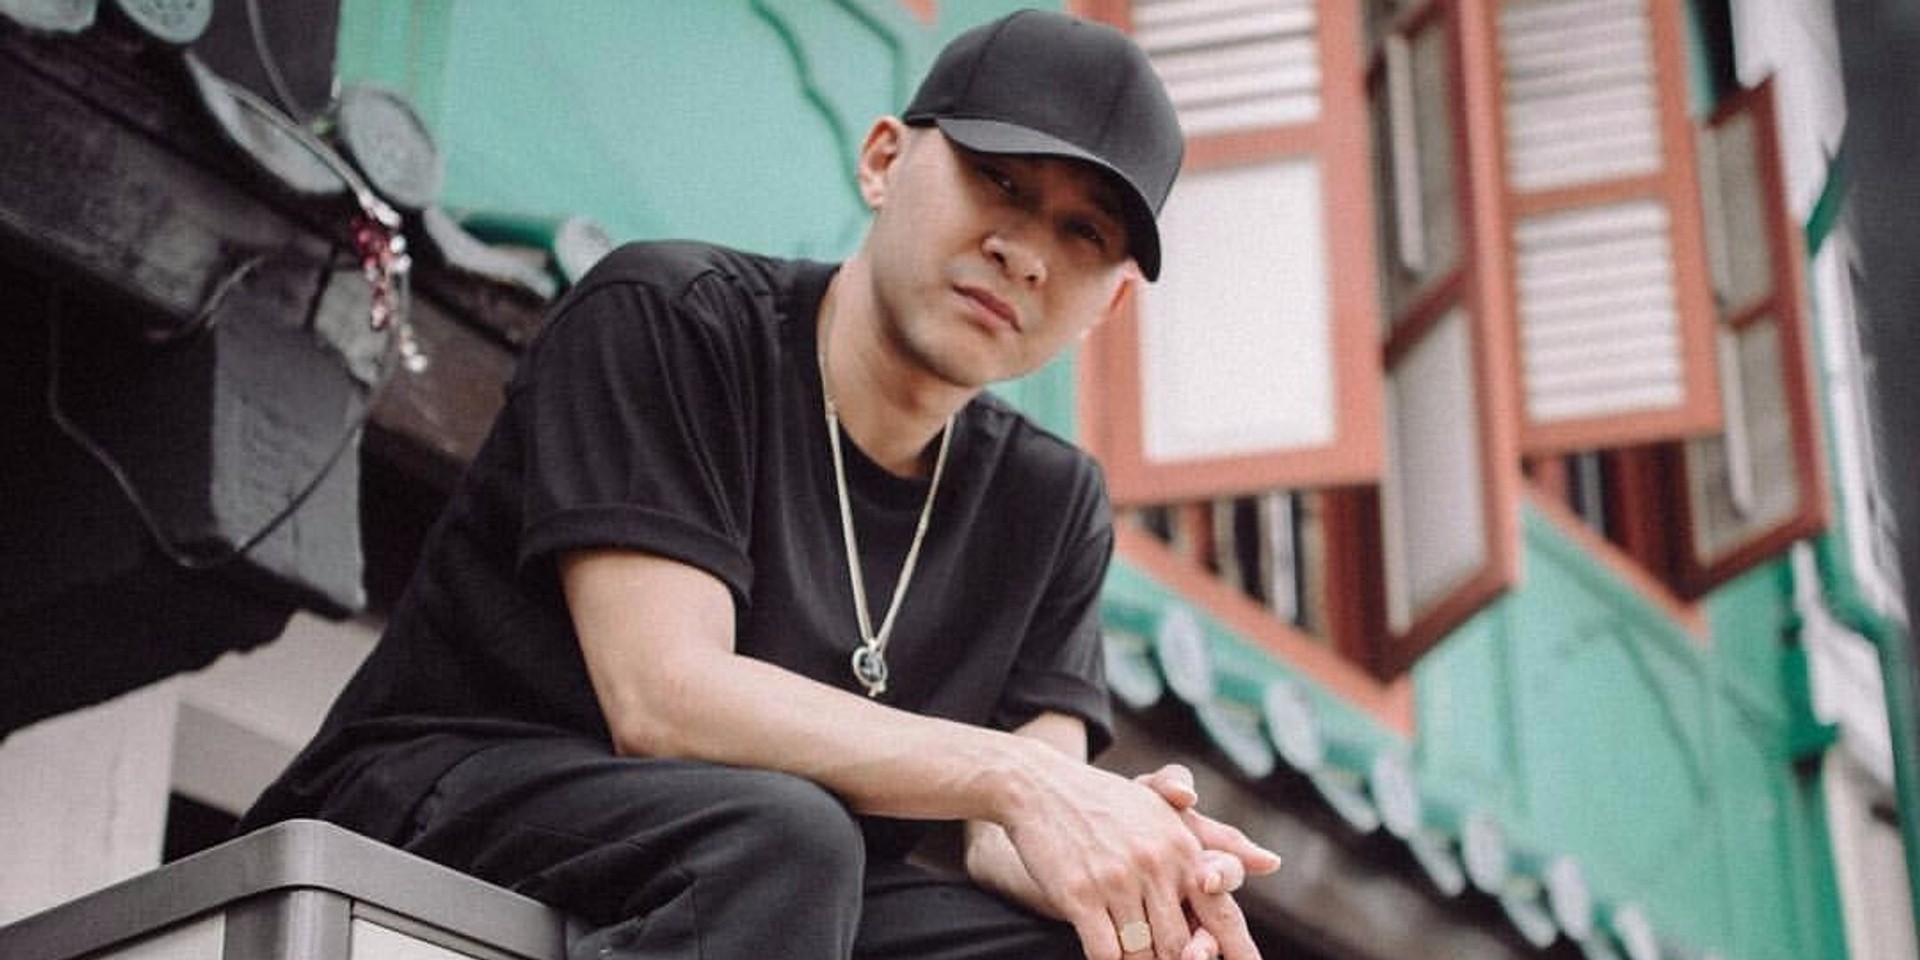 KoFlow tells his hip-hop story with a special solo concert, FLOW